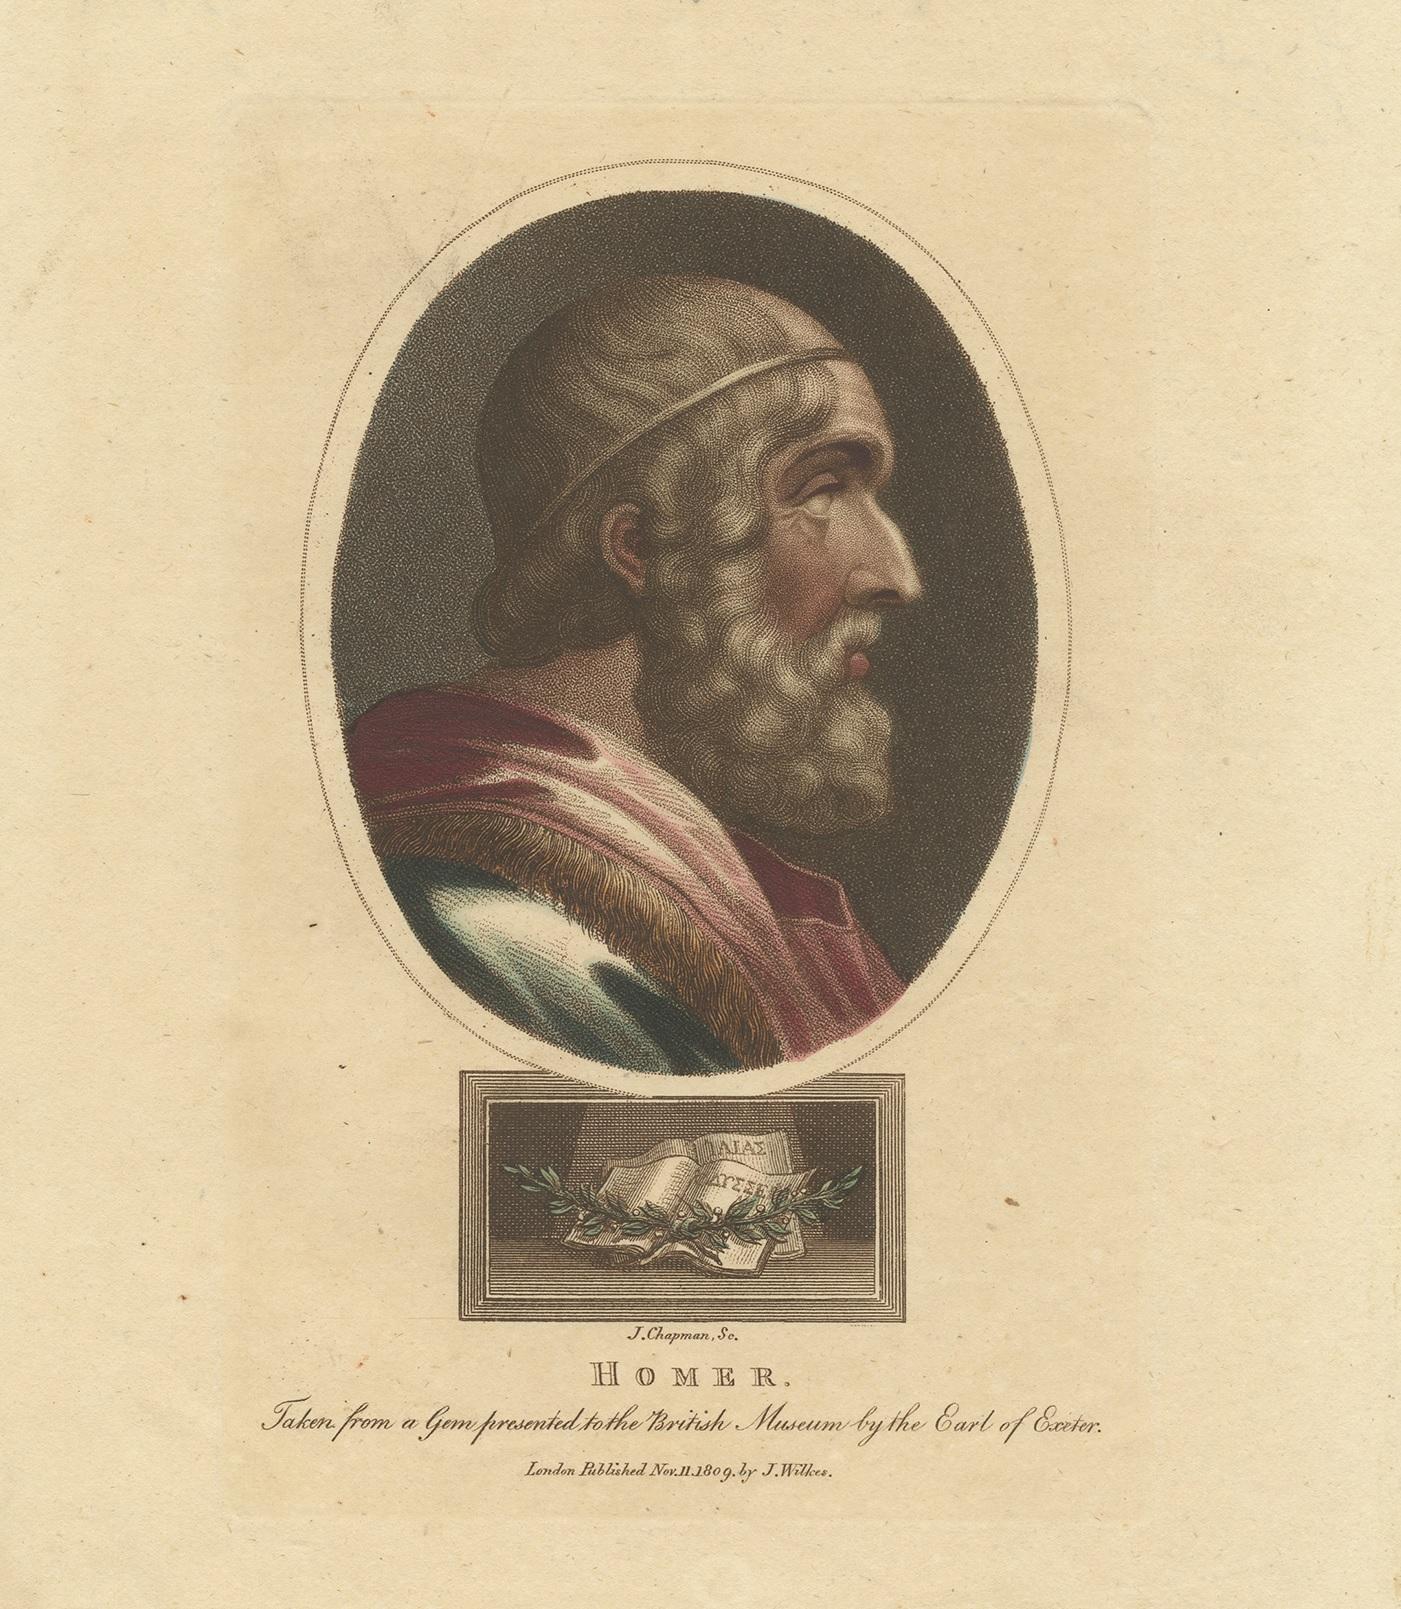 Antique print titled 'Homer'. Portrait of Homer; in profile, to the right; bearded, wearing head band, in oval frame; in rectangular frame below two laurel leaves over two open books. One of a number of stipple heads of Kings and Queens published by